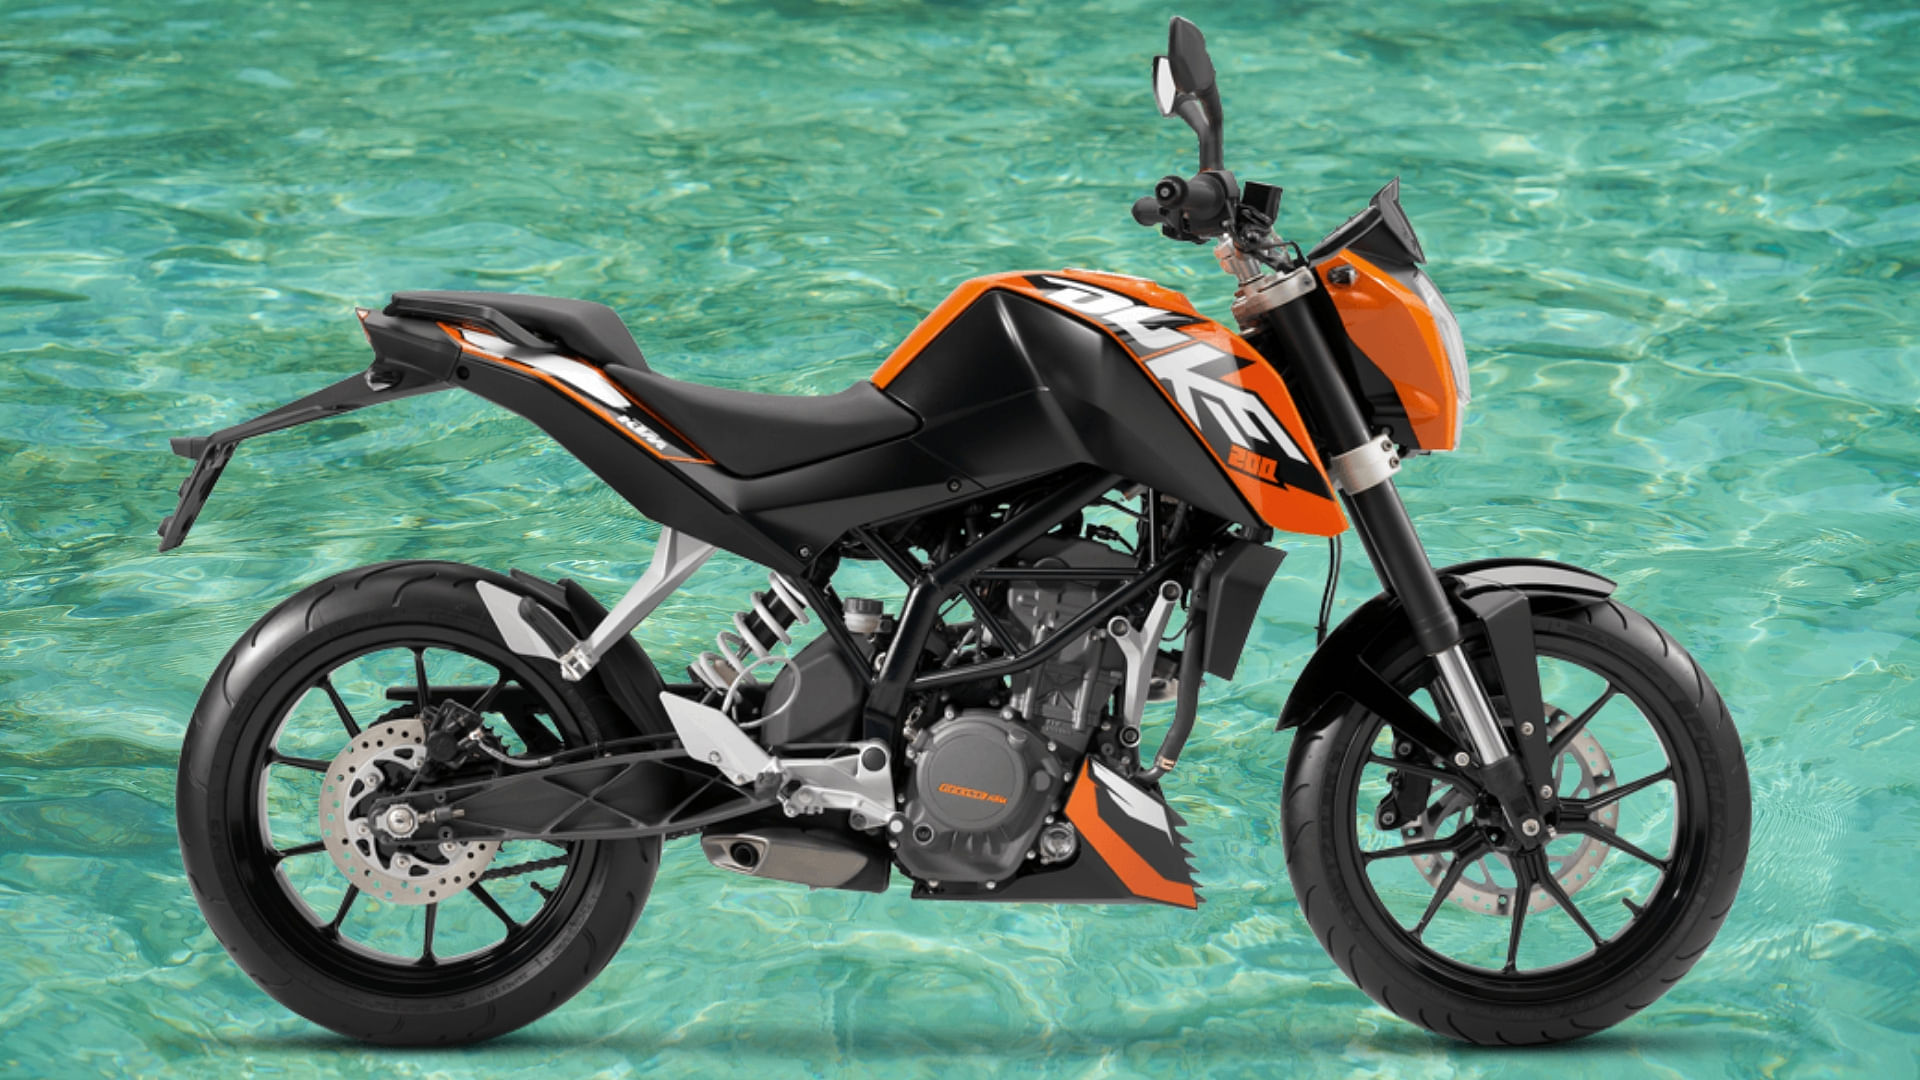 Best 200cc Bikes in India in 2019: List of the Top 200cc Motorcycles